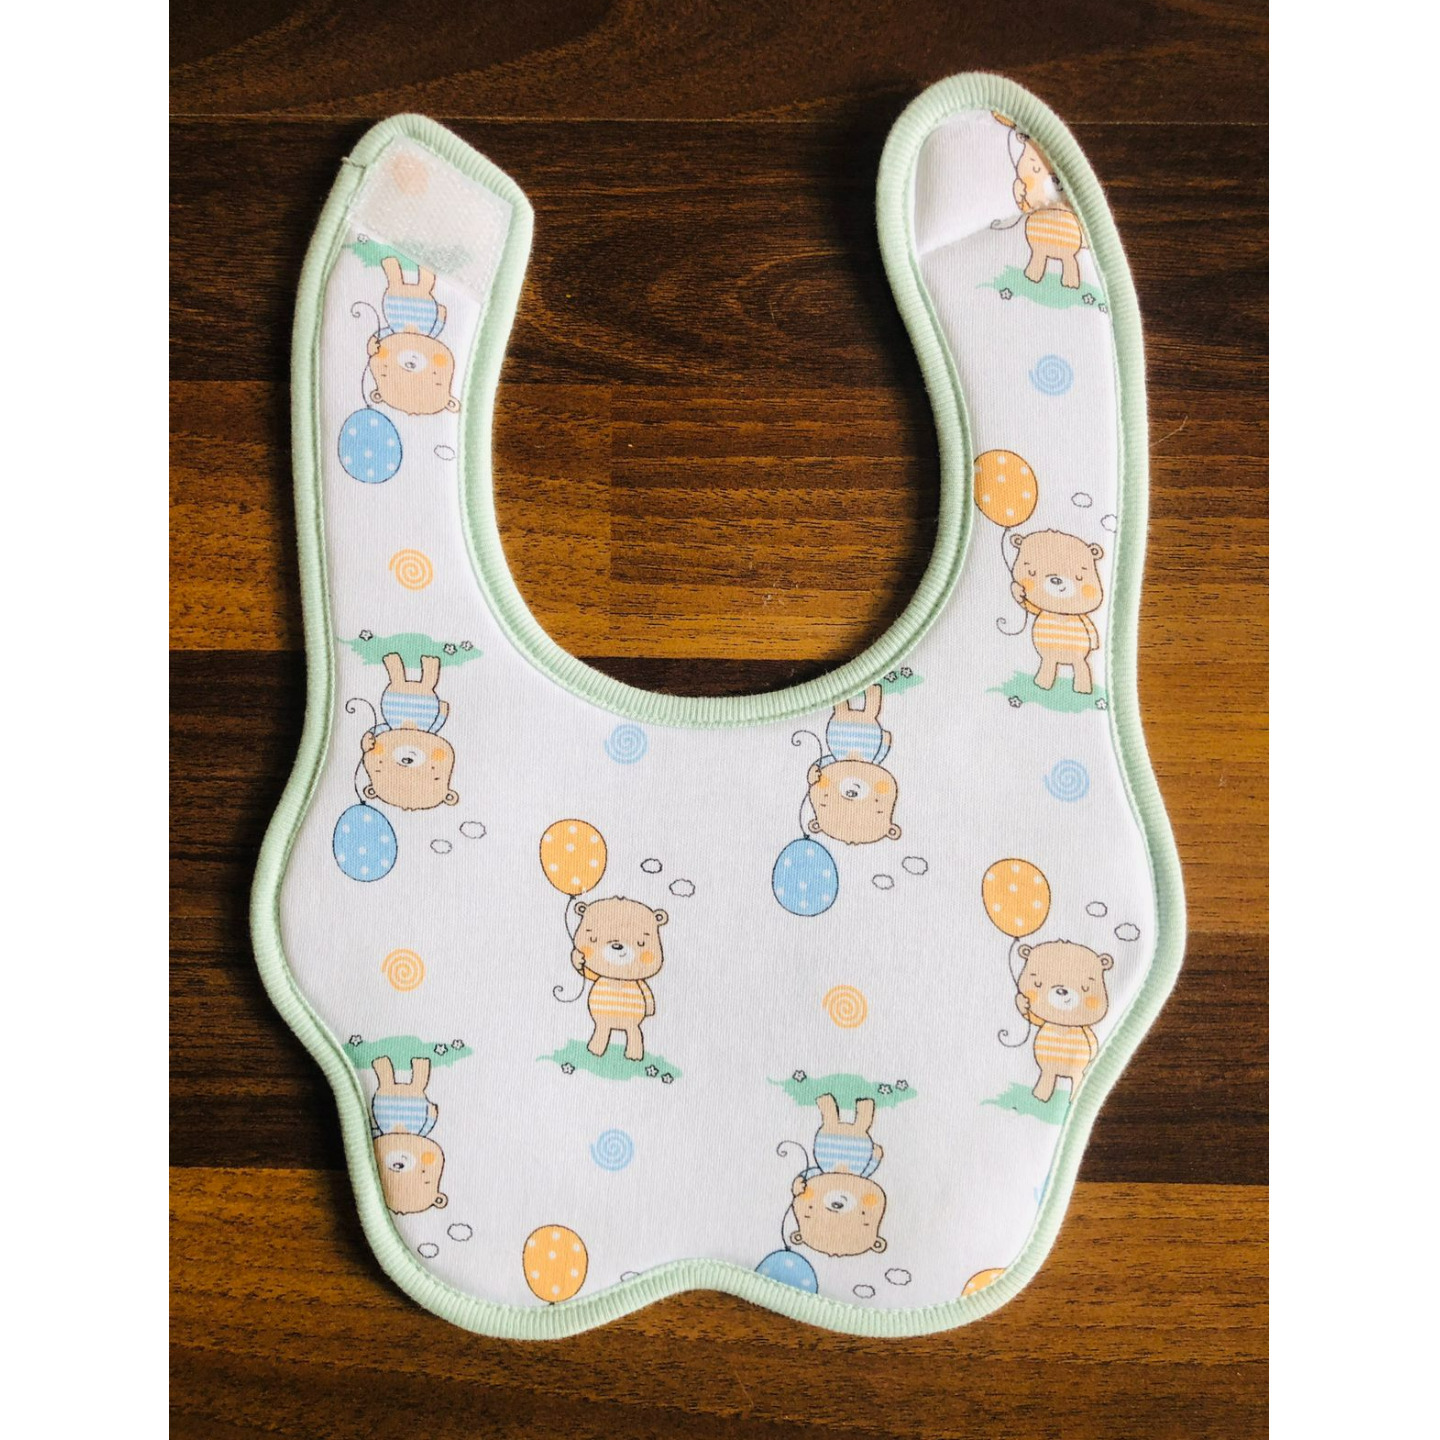 Cradle Togs Newborn Infant Baby Bib Rs 140 Only 